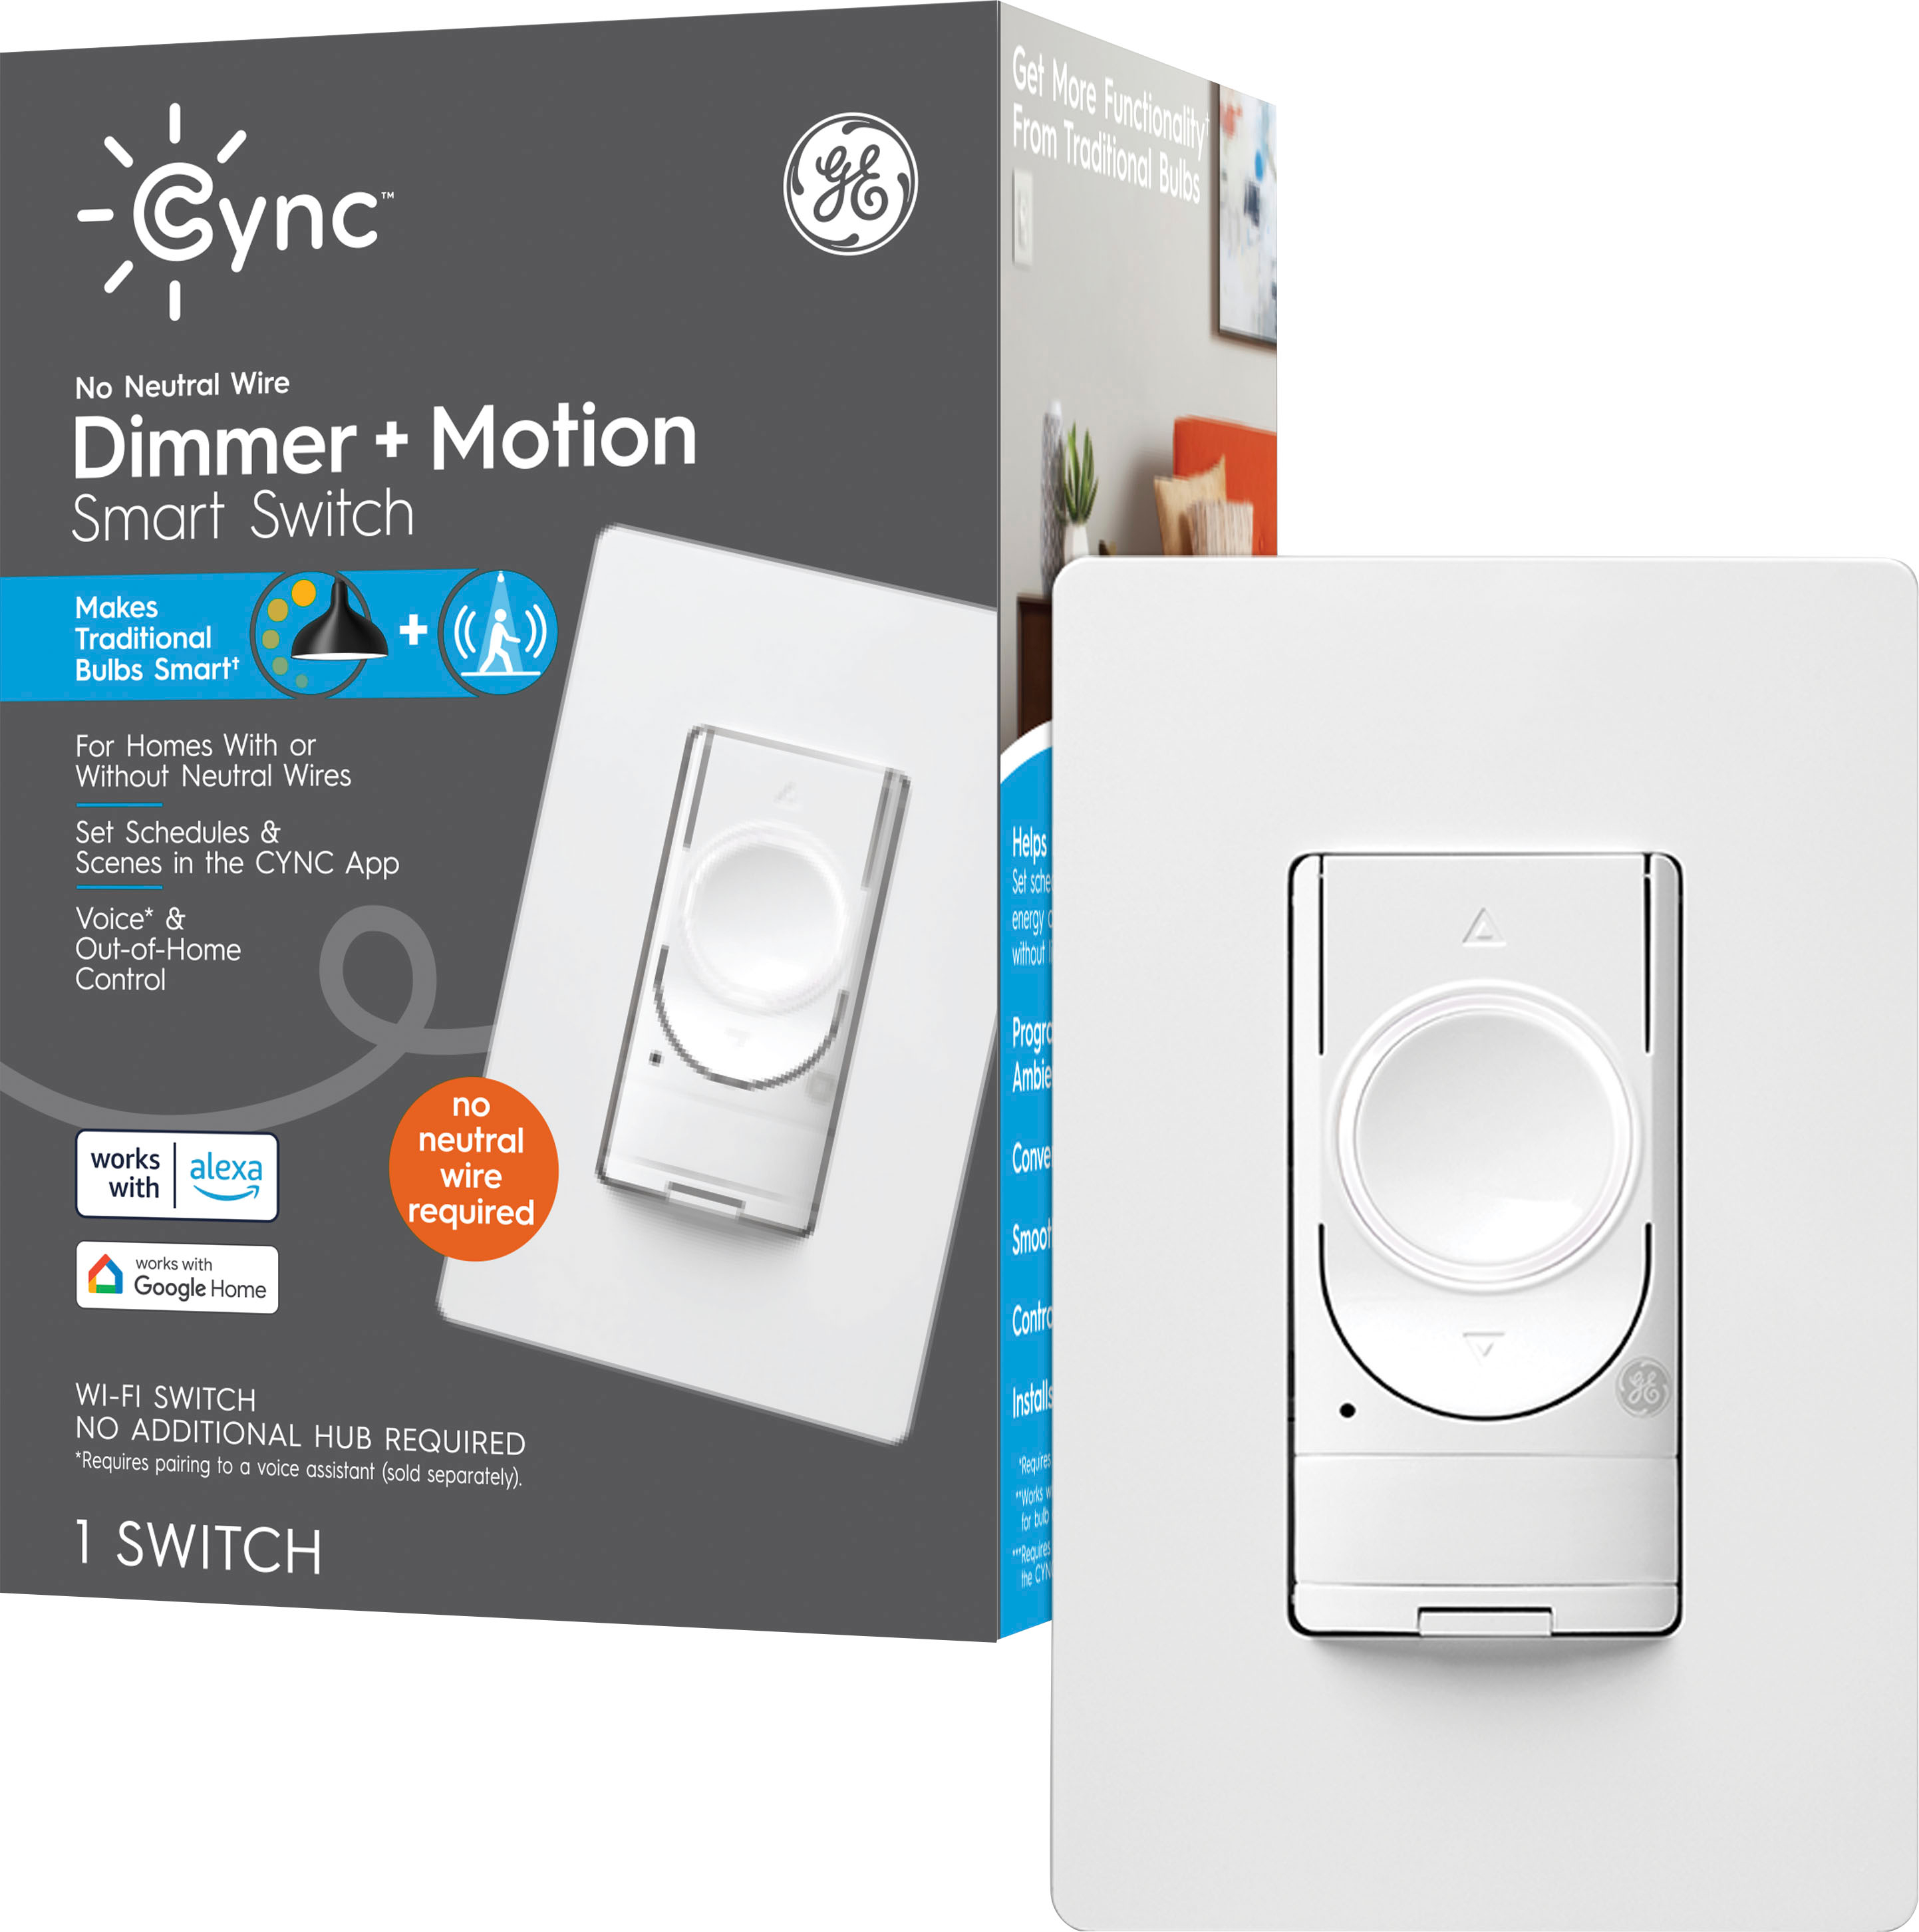 GE CYNC Dimmer + Motion Sensor Smart Switch, No Neutral Wire Required, Bluetooth and 2.4 Wifi (Packing May Vary) White 93120076 - Best Buy